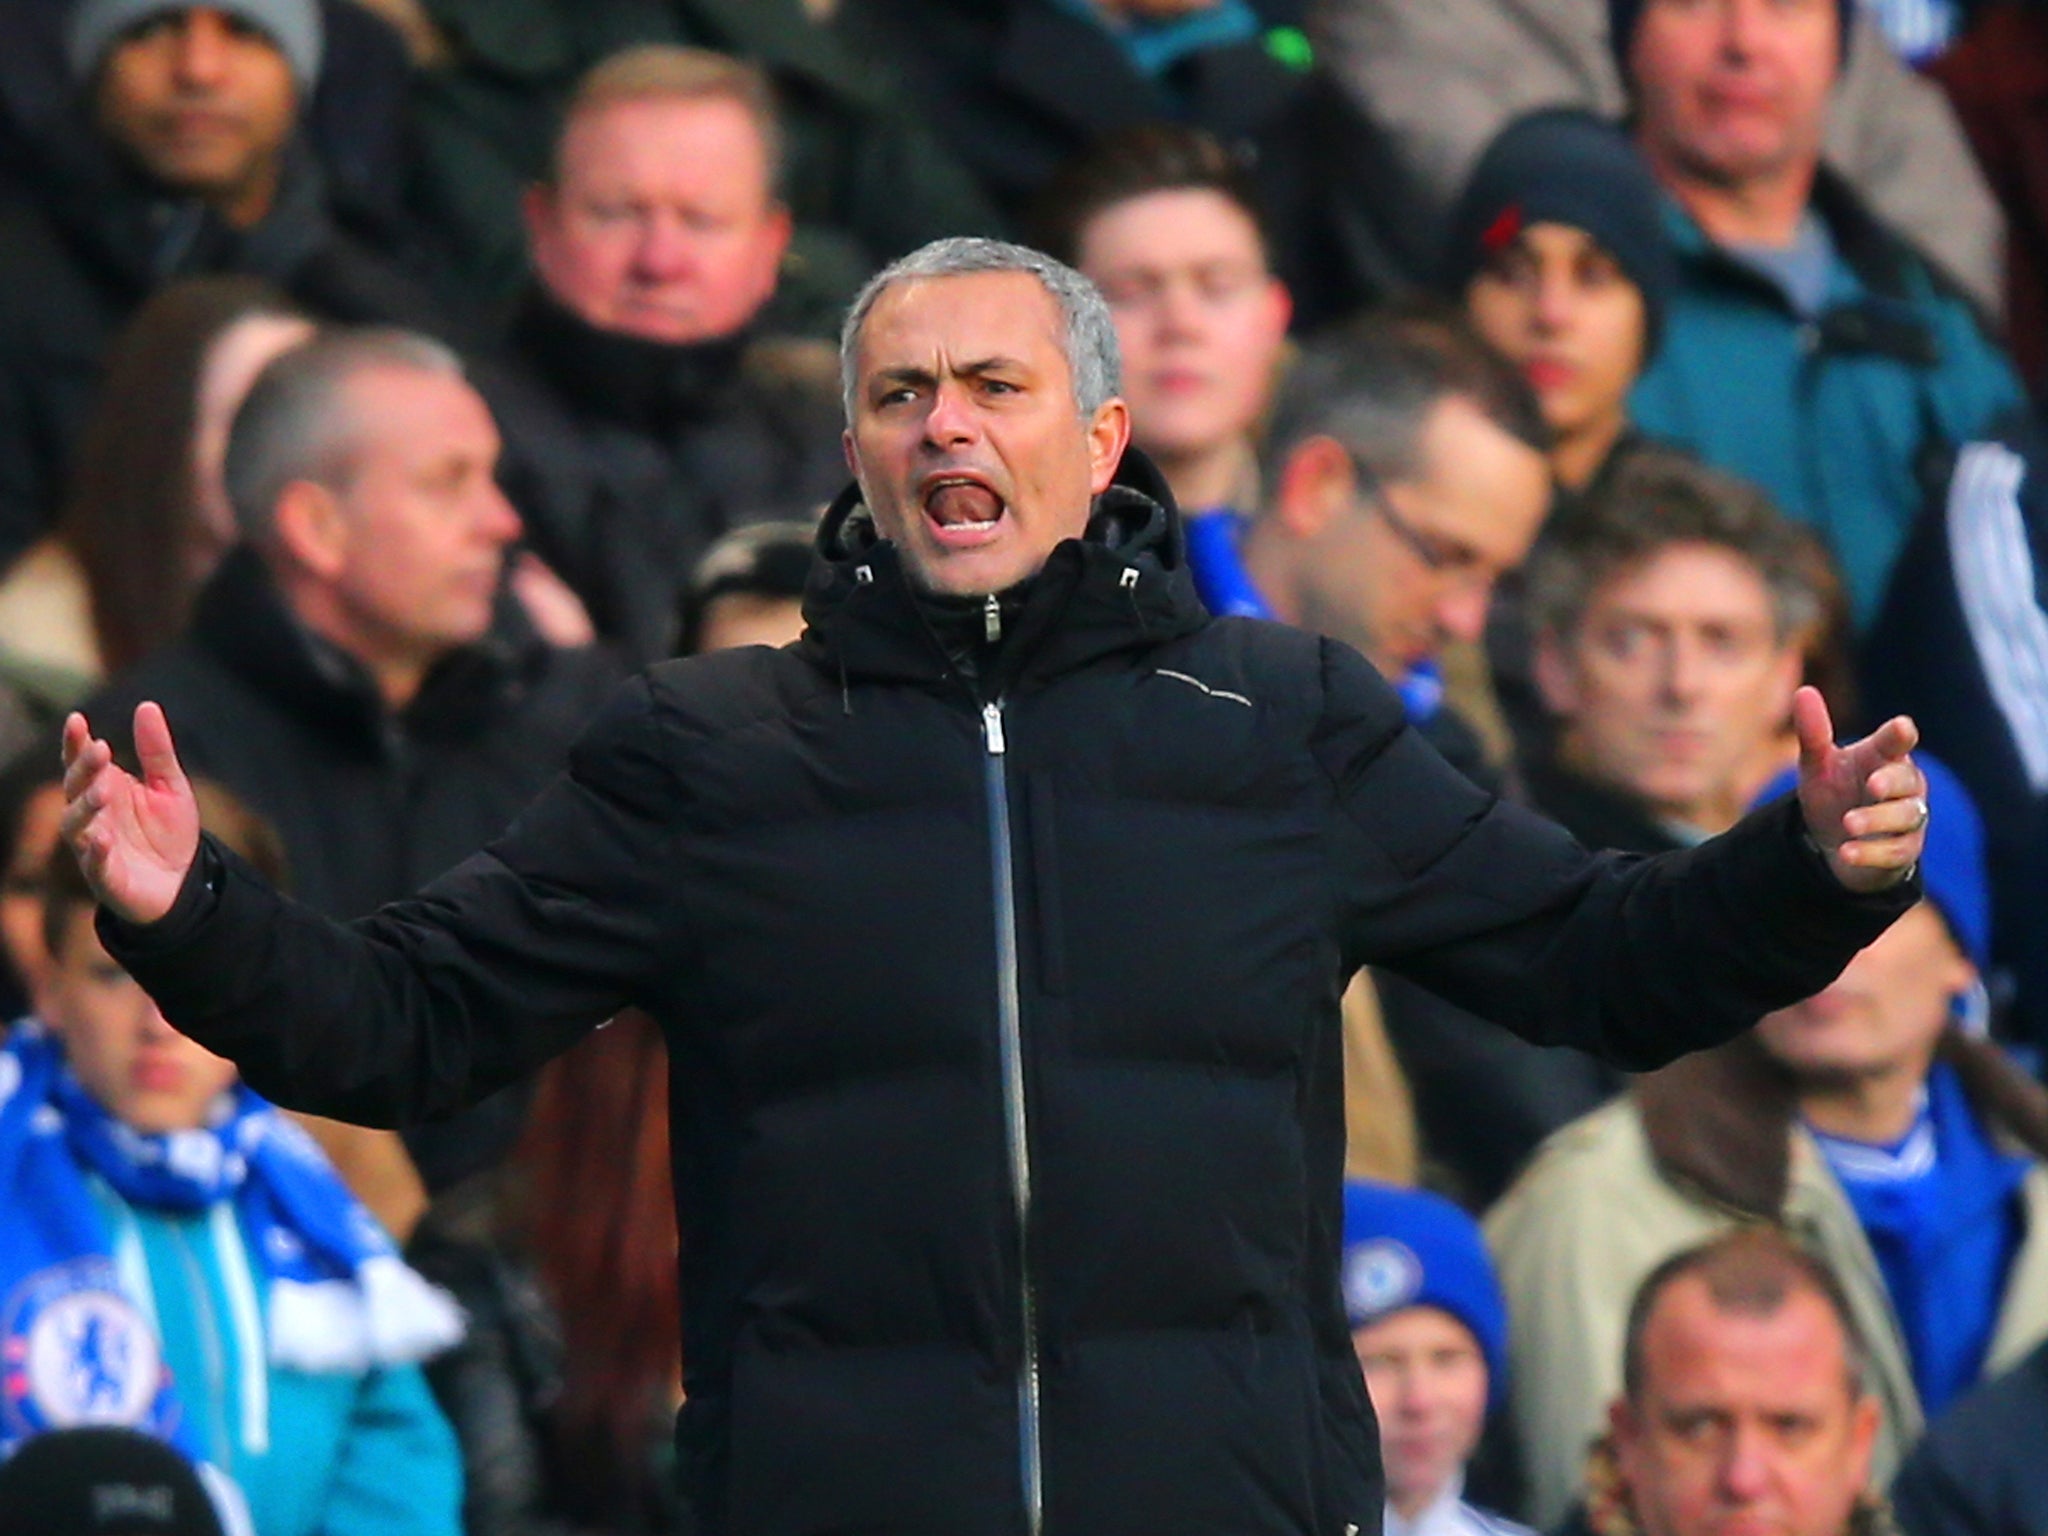 Jose Mourinho will hope to guide his Chelsea team to victory against Southampton